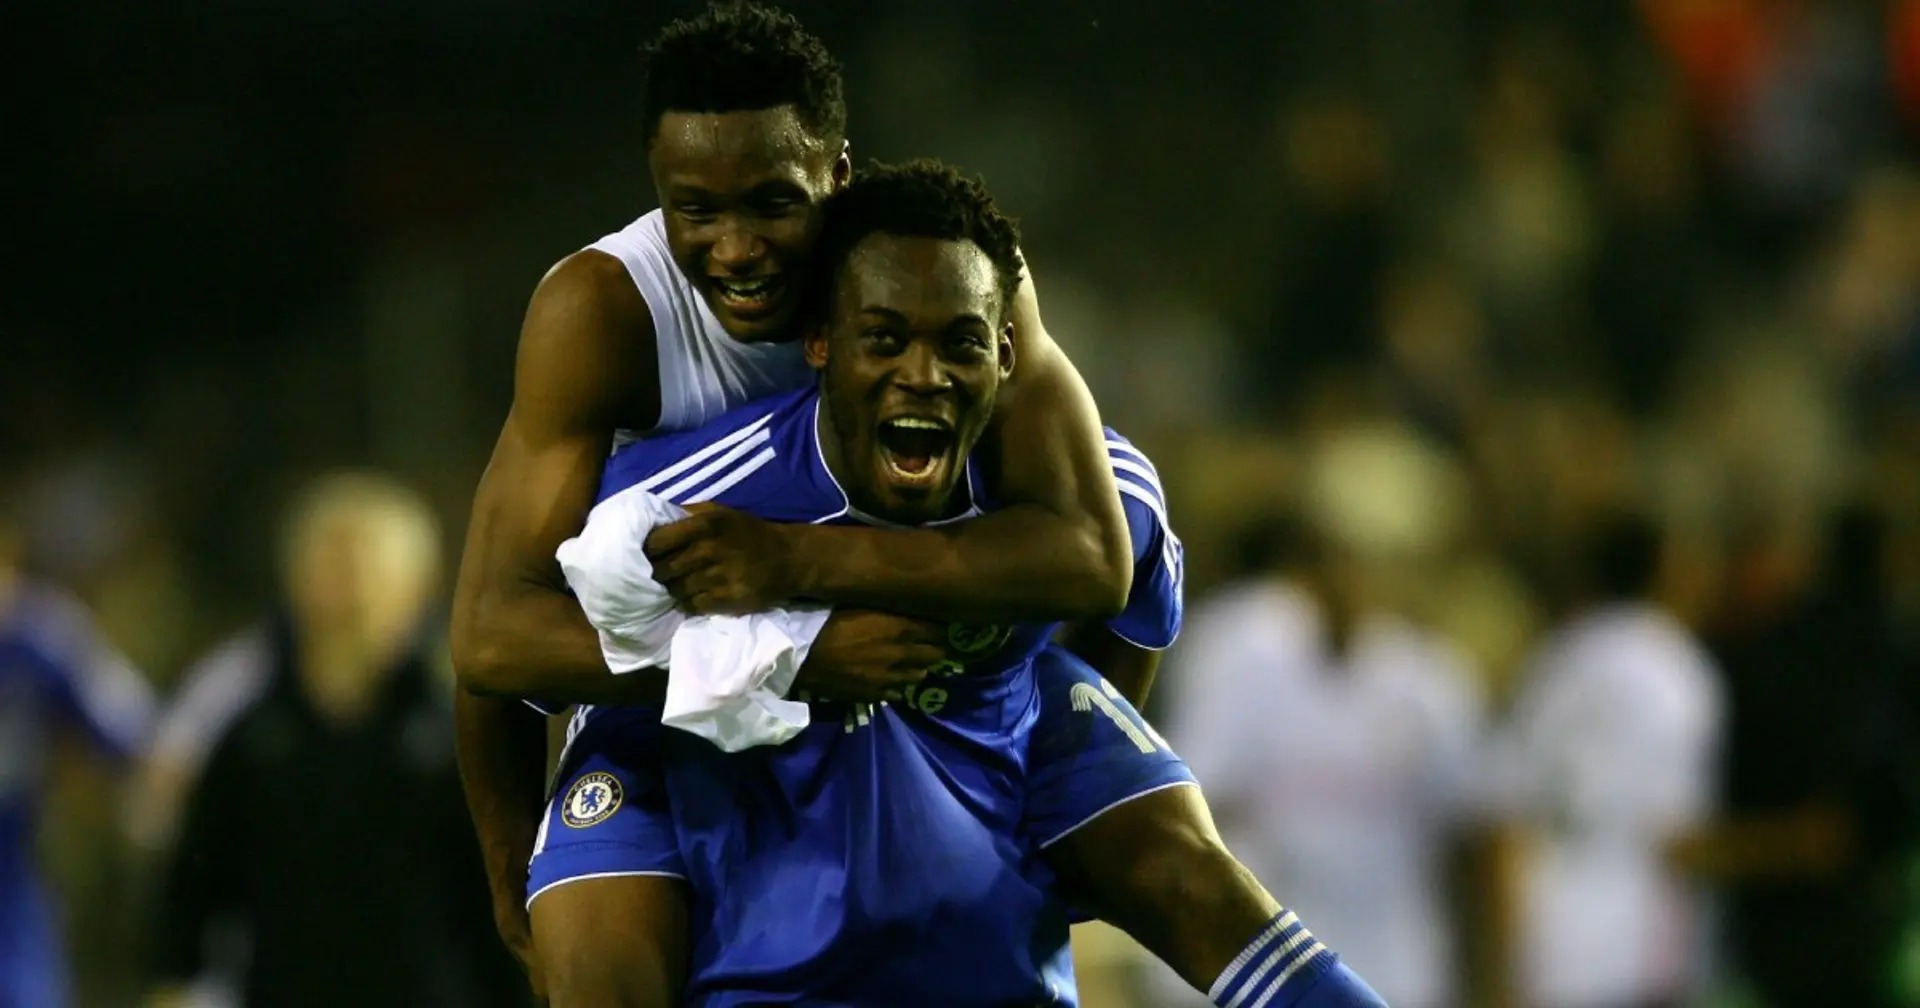 'He was the guy who really helped me and made me have a lot of confidence': Mikel on his friendship with Essien